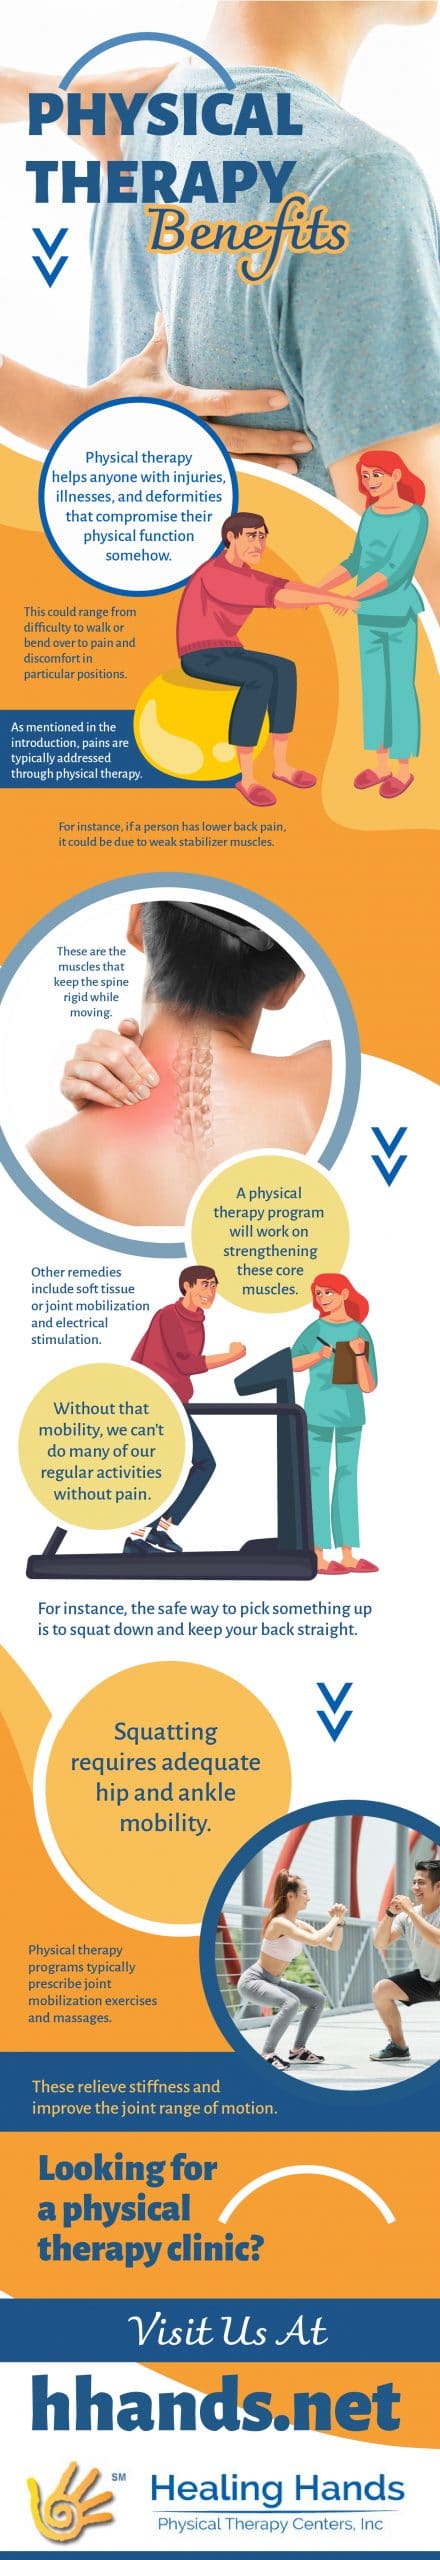 benefits of Physical Therapy 